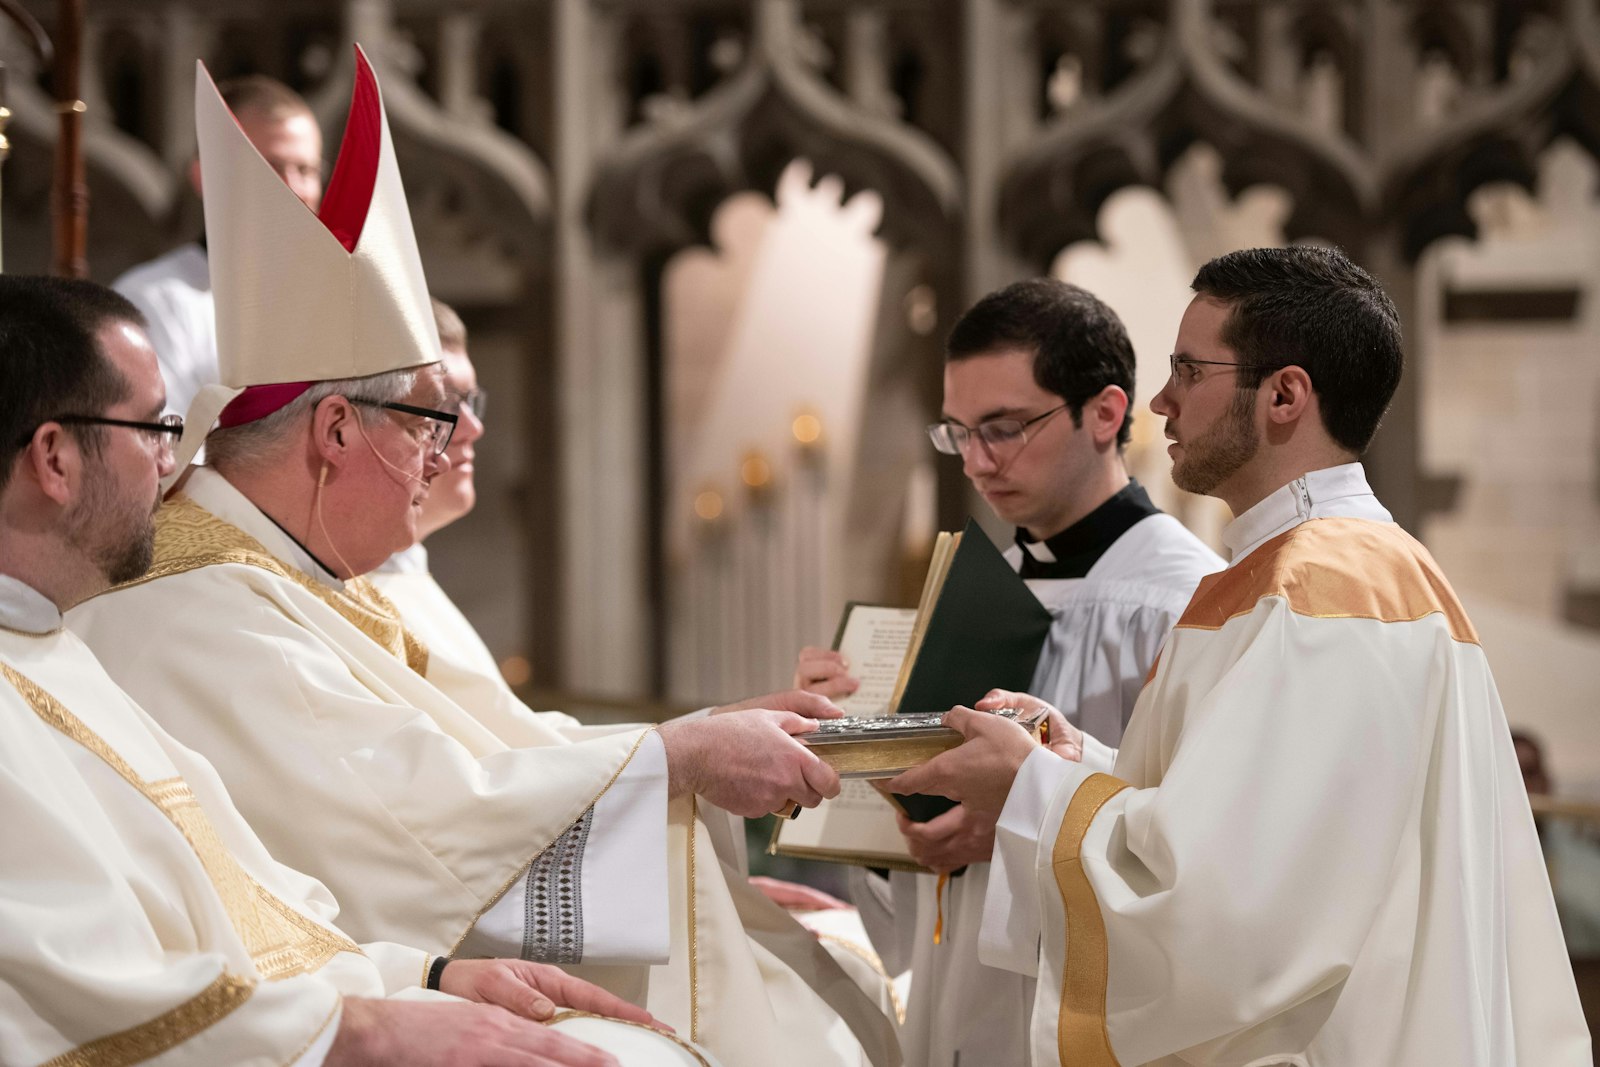 Bishop Battersby performs part of the ordination rite as Deacon Jeremy Schupbach kneels April 23 at the Cathedral of the Most Blessed Sacrament. Deacon Schupbach said his calling was strengthened through prayer and study of the Church's rich theology.